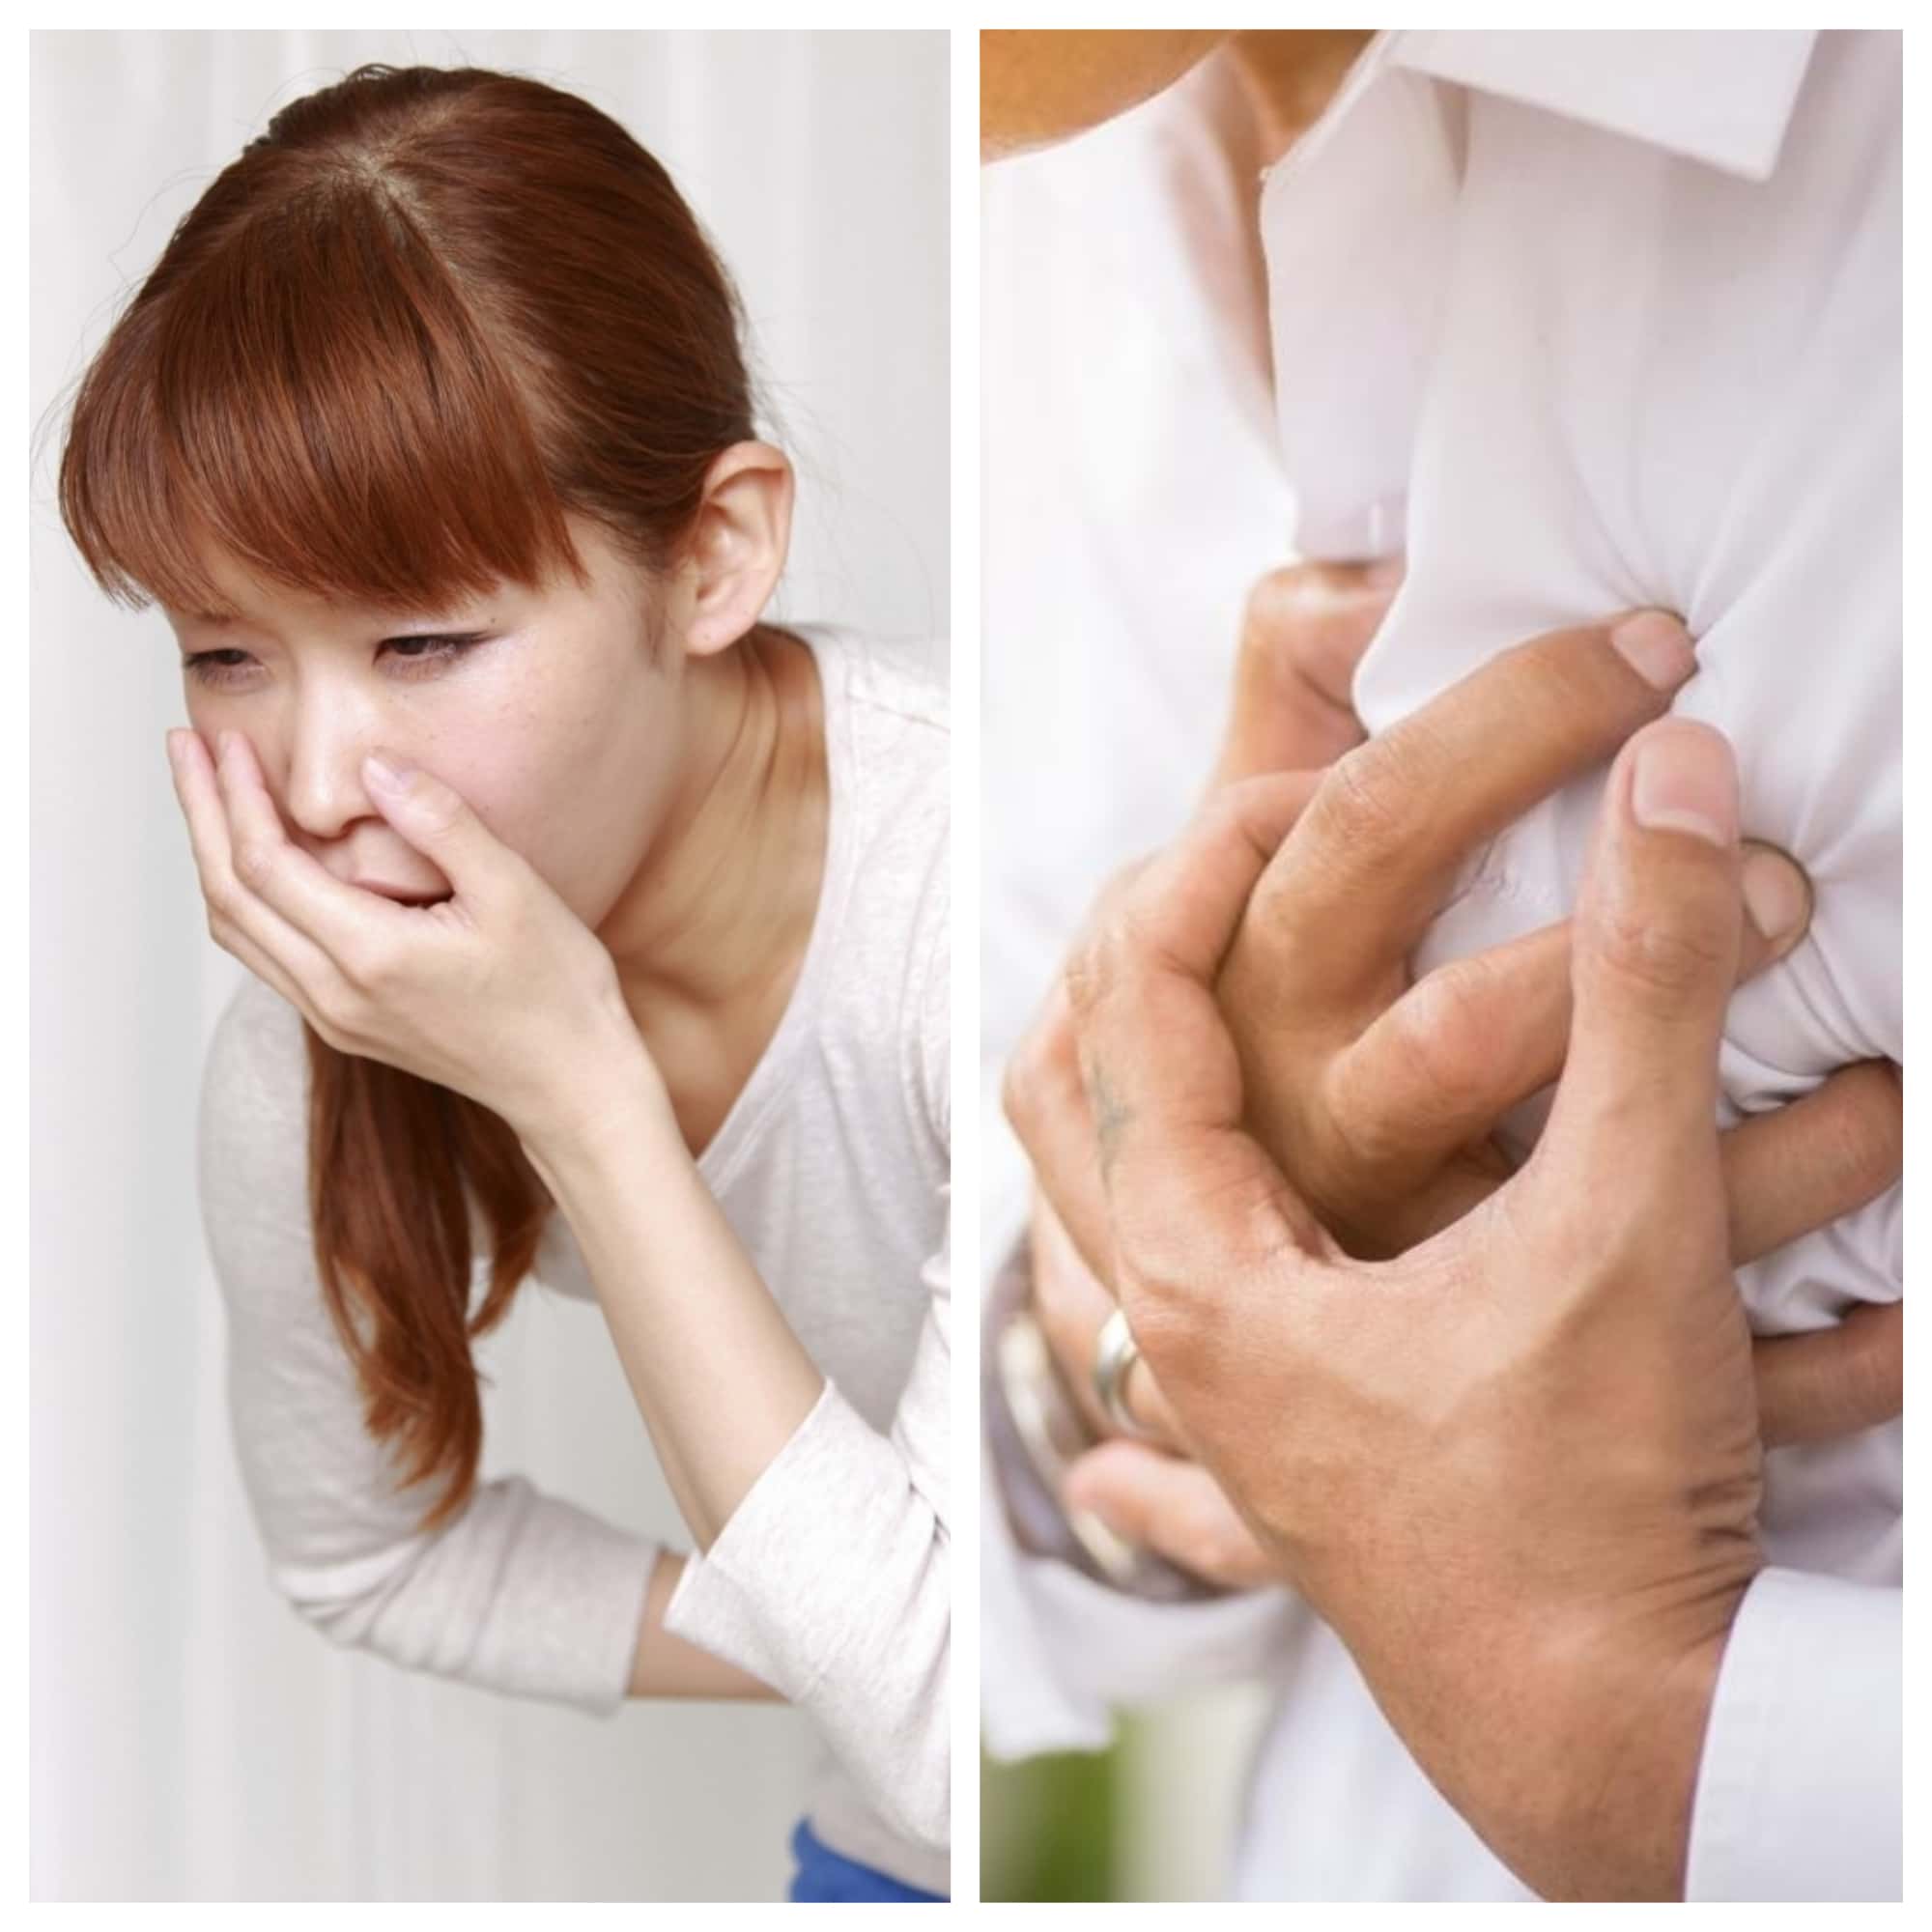 Early Symptoms of a Heart Attack You Should Know â Page 3 â Healthy Habits